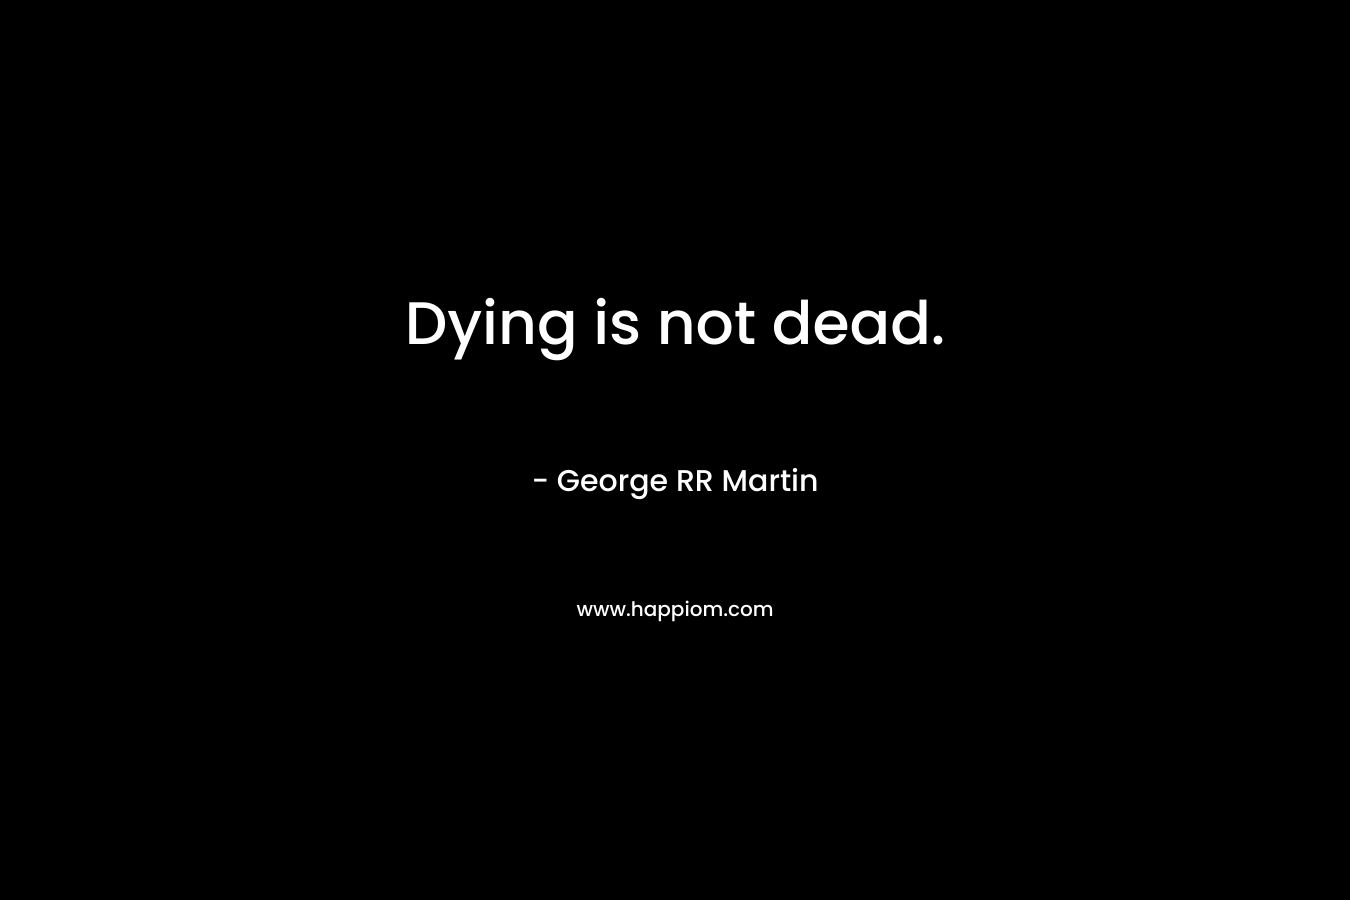 Dying is not dead. – George RR Martin